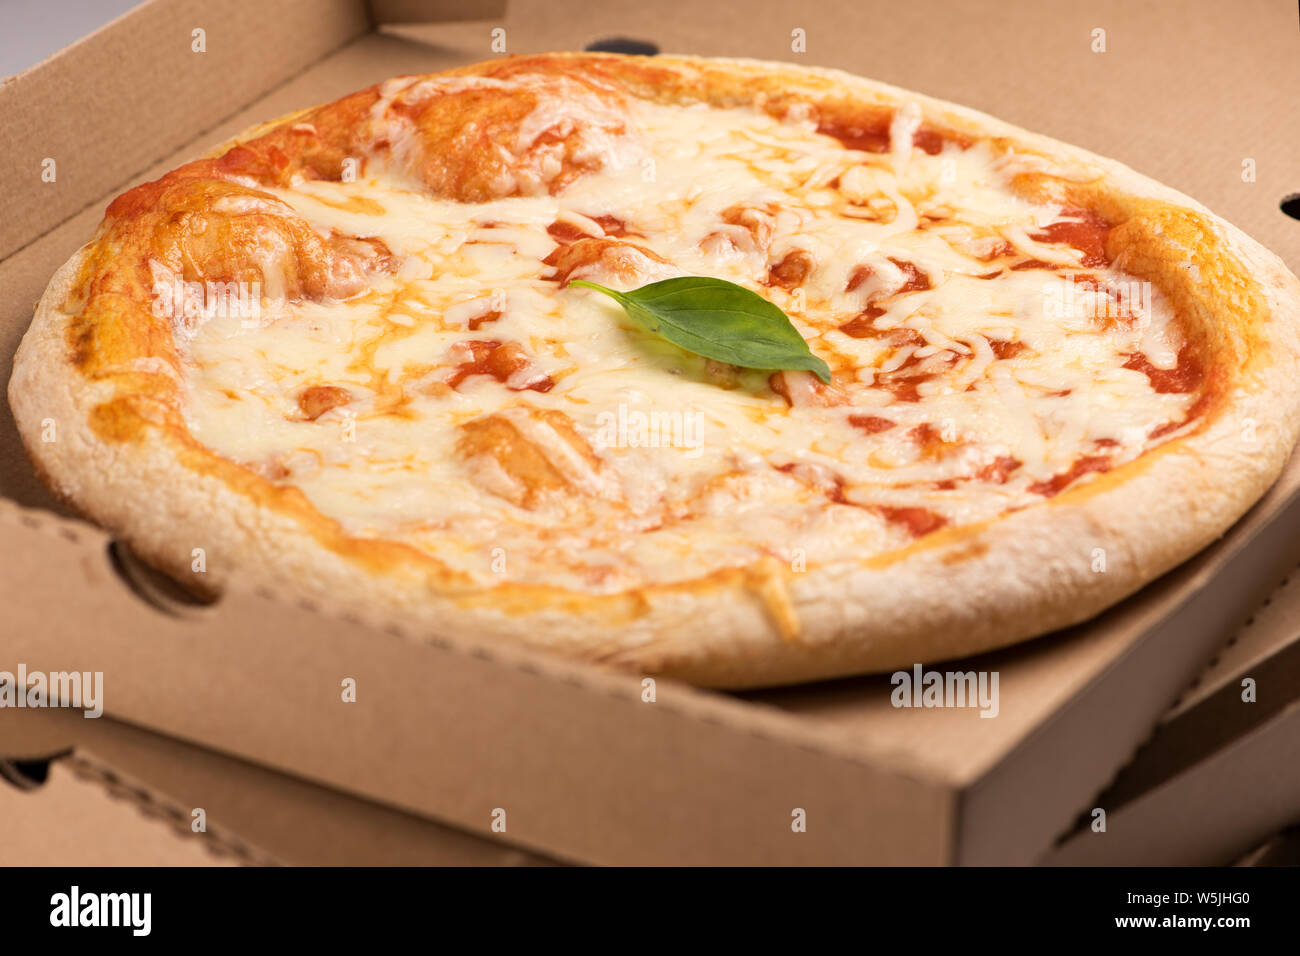 Pizza delivery. Pizza menu, pizza margherita on box for take away or delivery Stock Photo